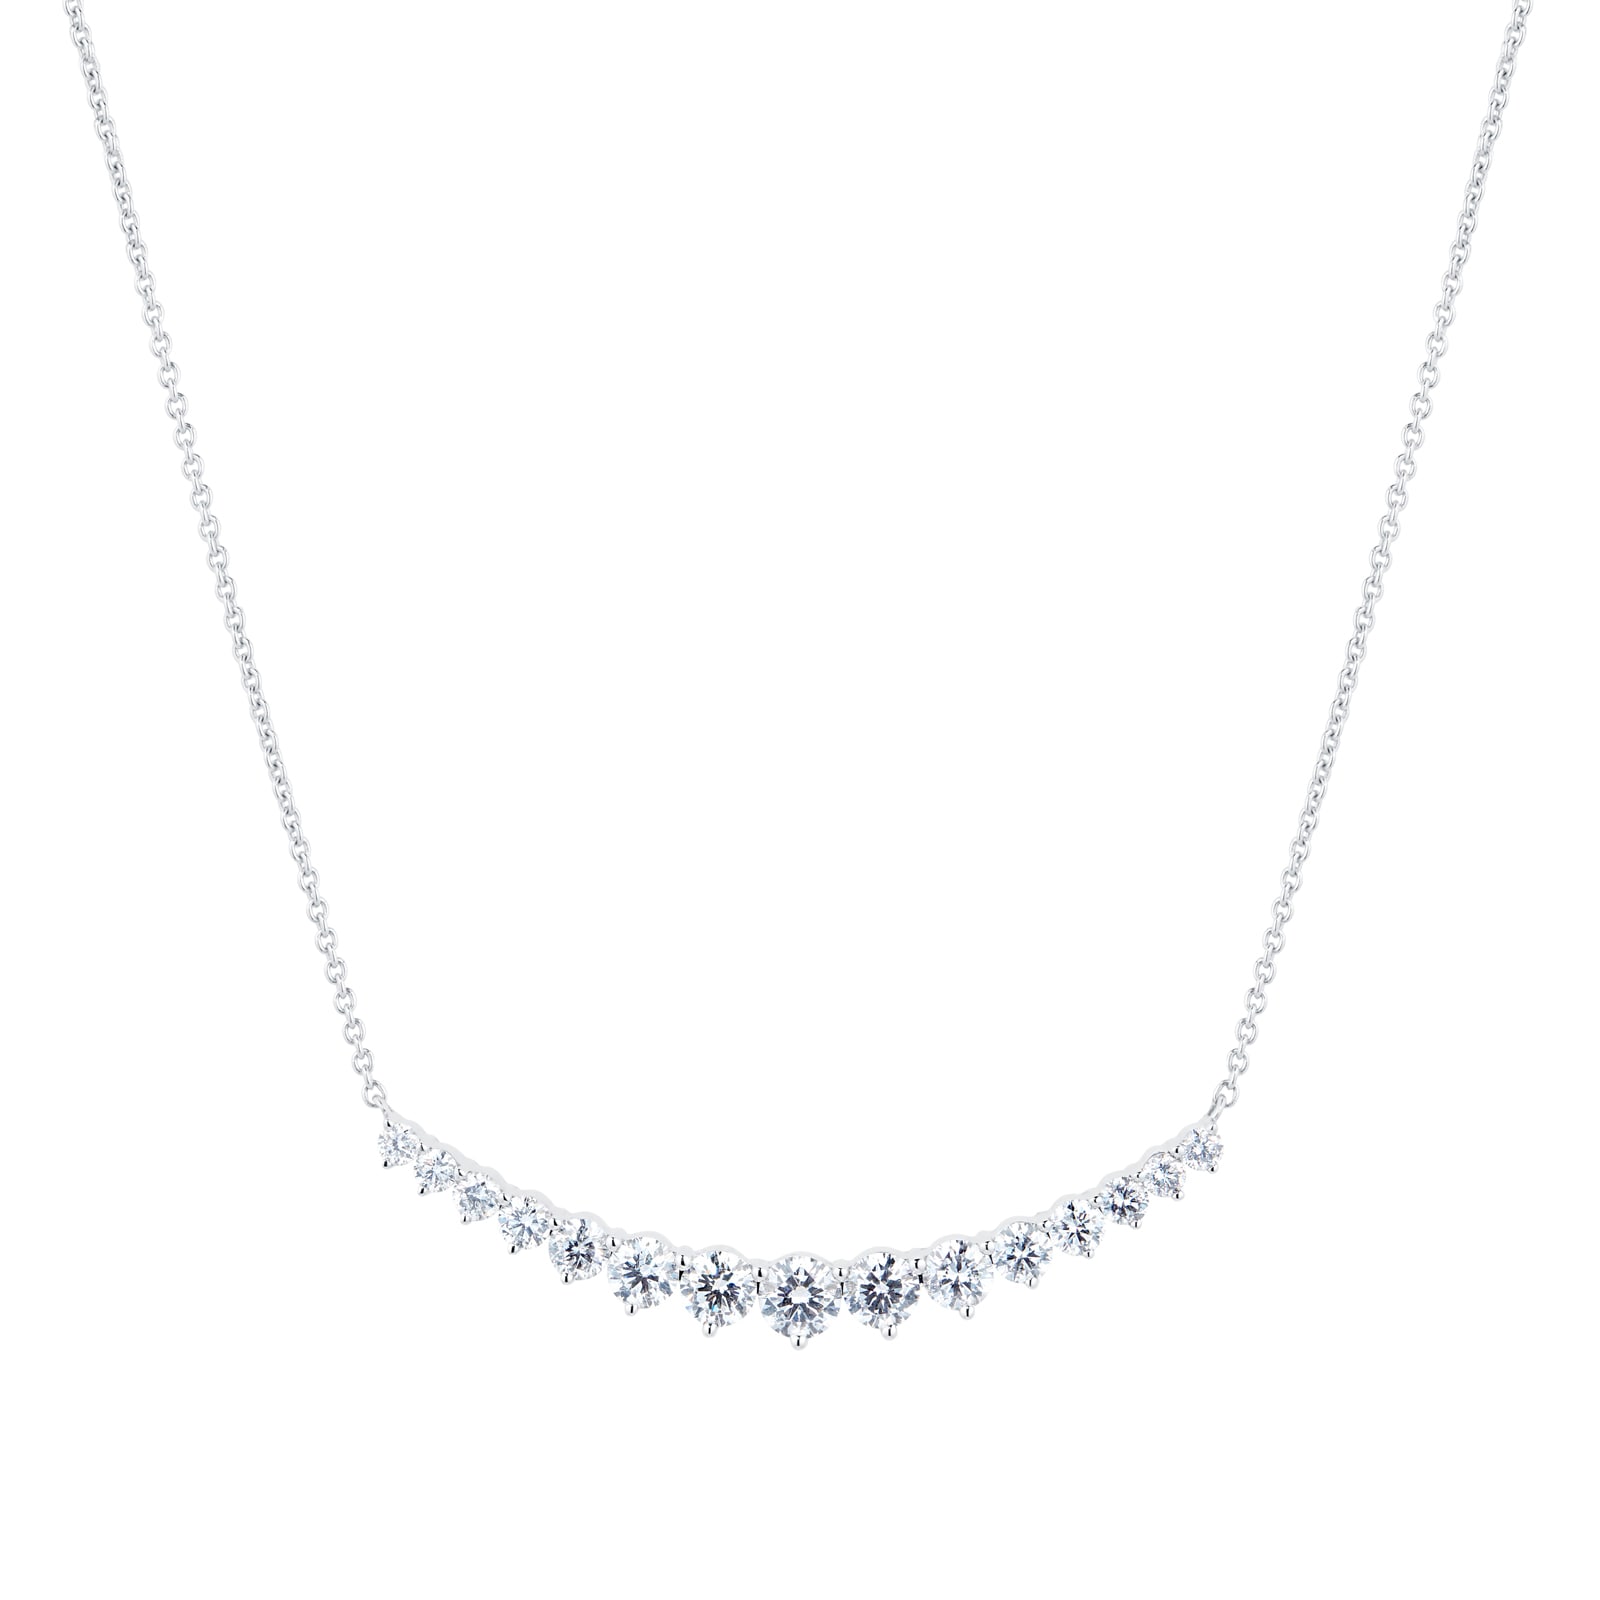 Parrys Jewellers 18ct White Gold 0.54ct Diamond Pendant With 45cm 18ct